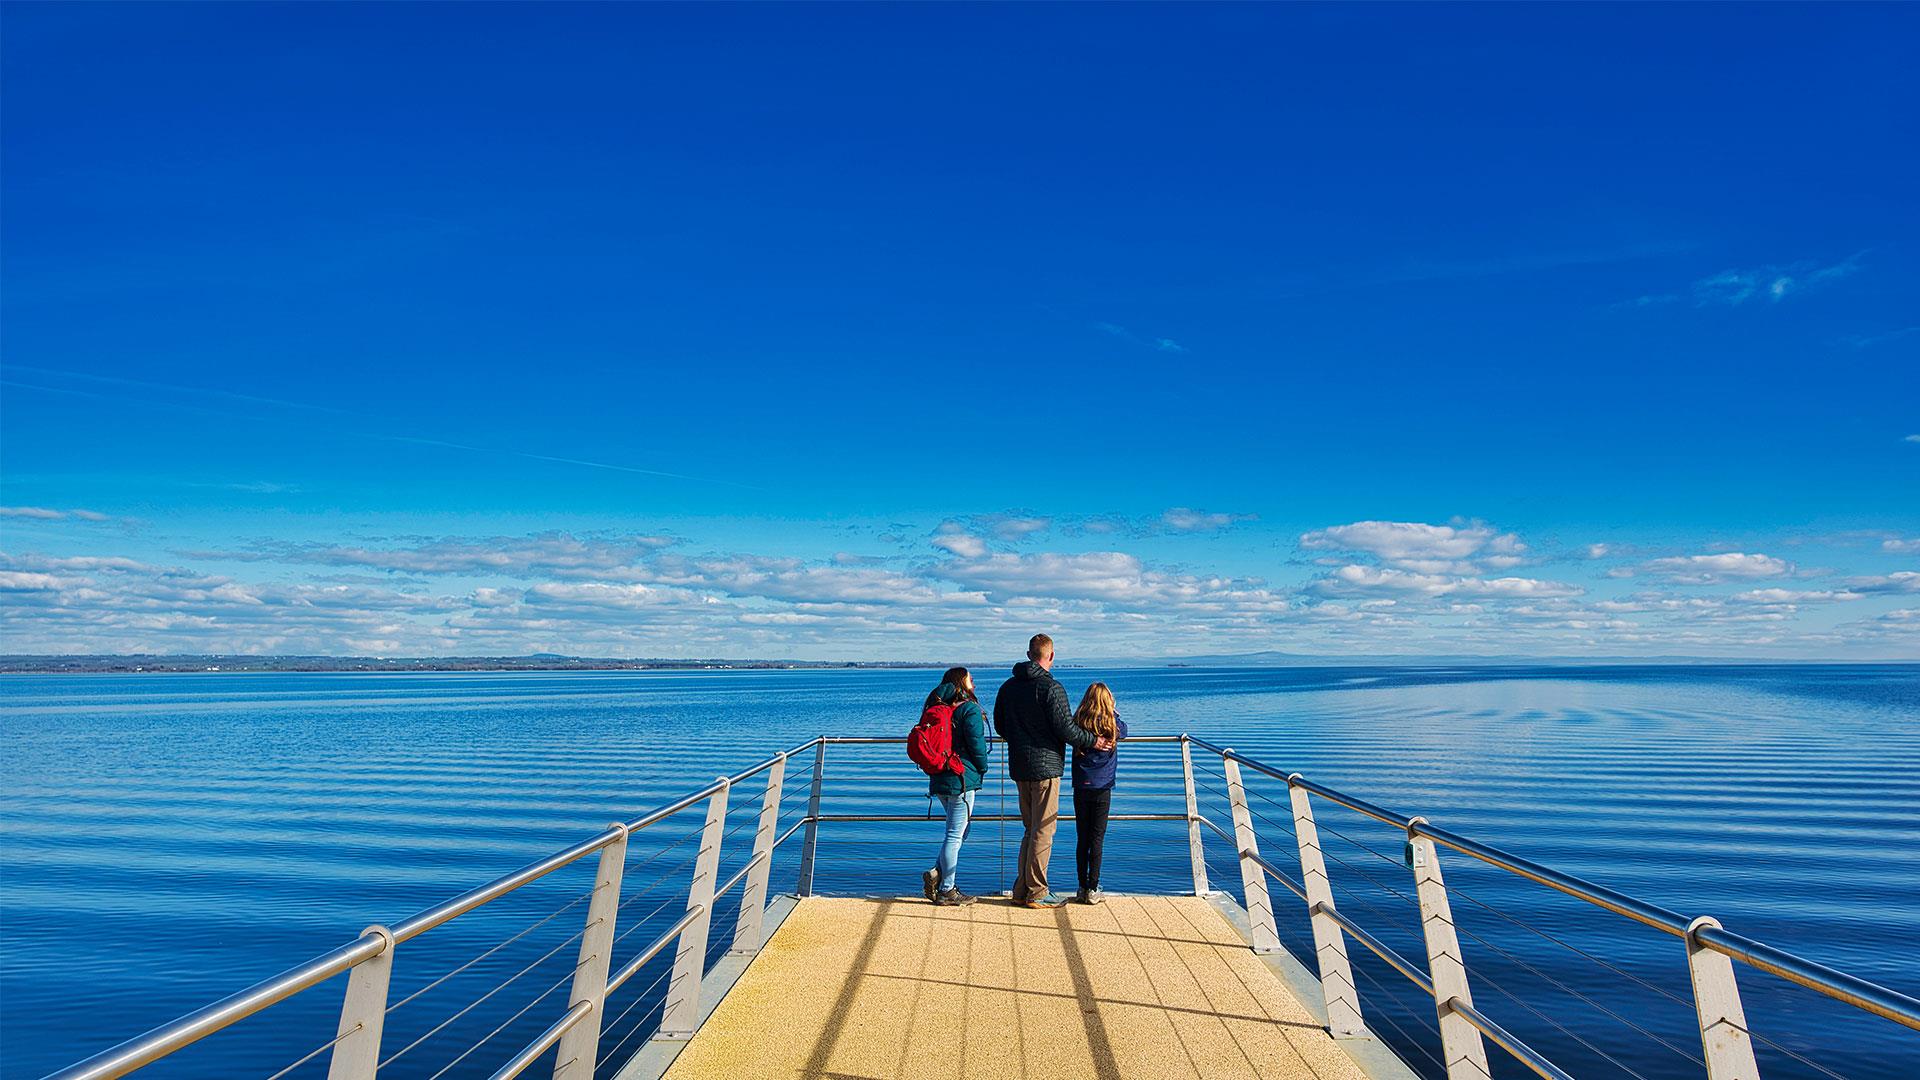 A family standing on the viewing platform overlooking Lough Neagh.